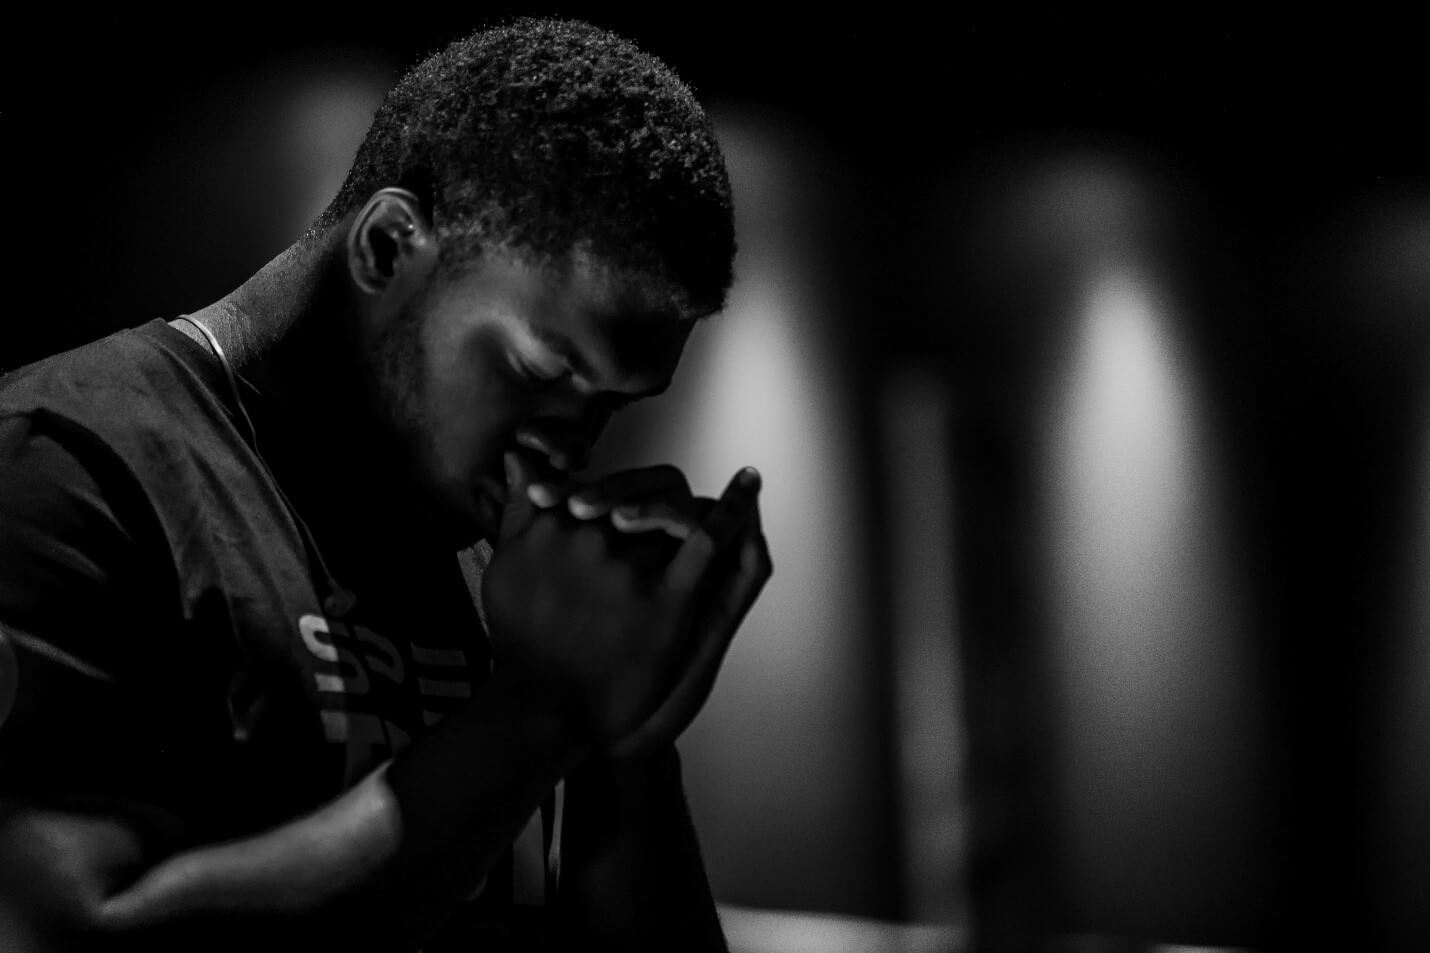 A Black man with his hands clasped in front of his face with his head bowed in a prayer pose.